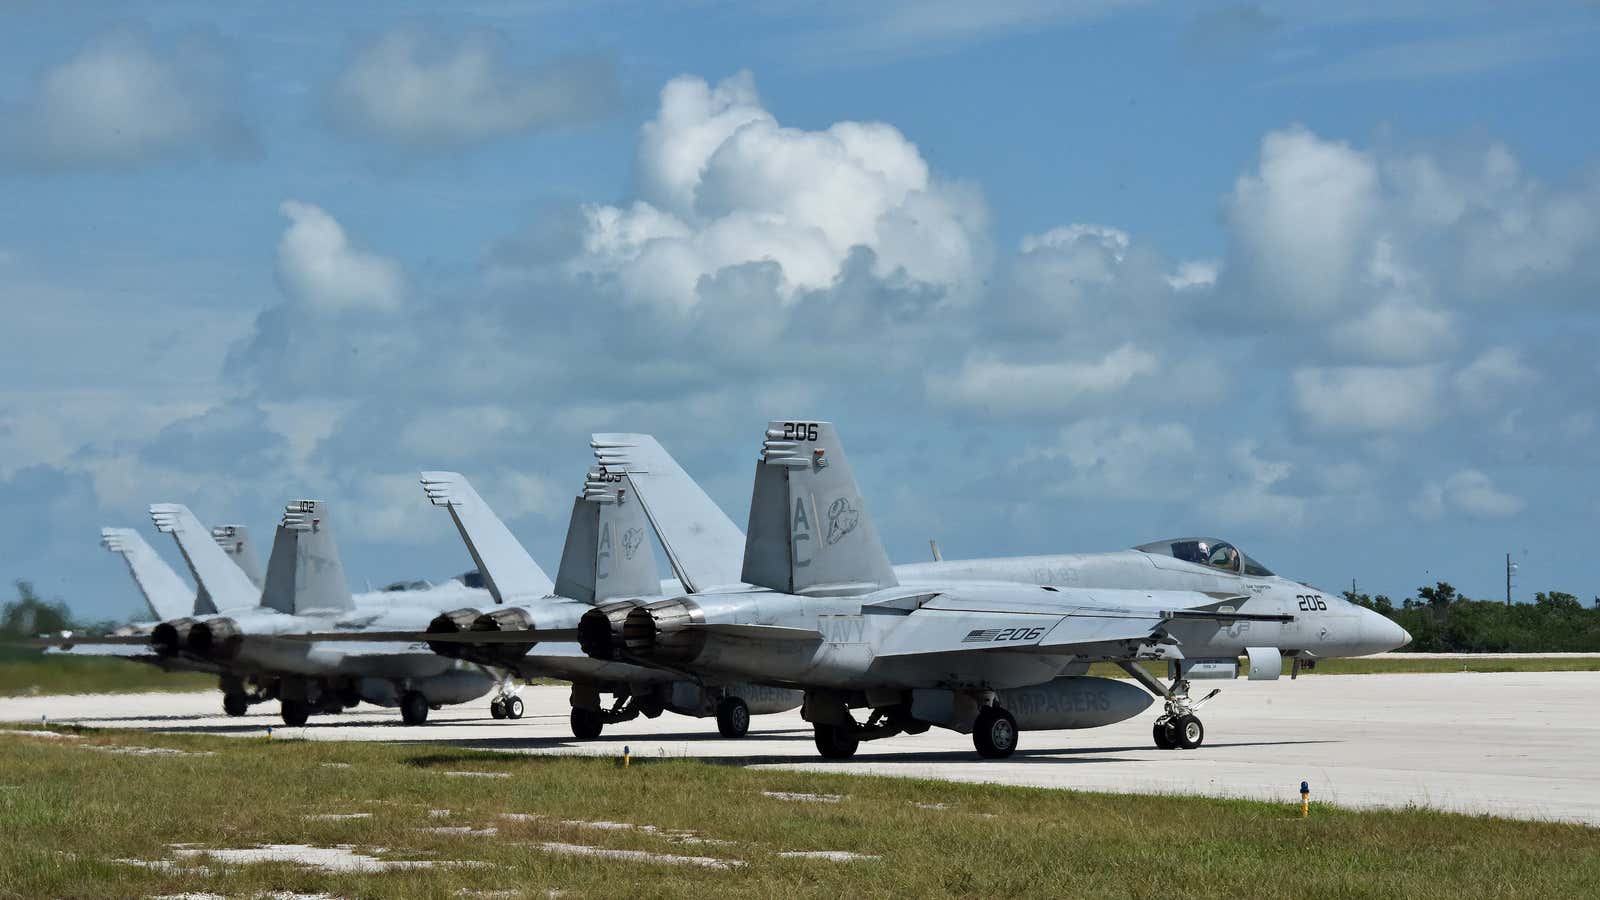 The alleged incident took place at Naval Air Station Key West.